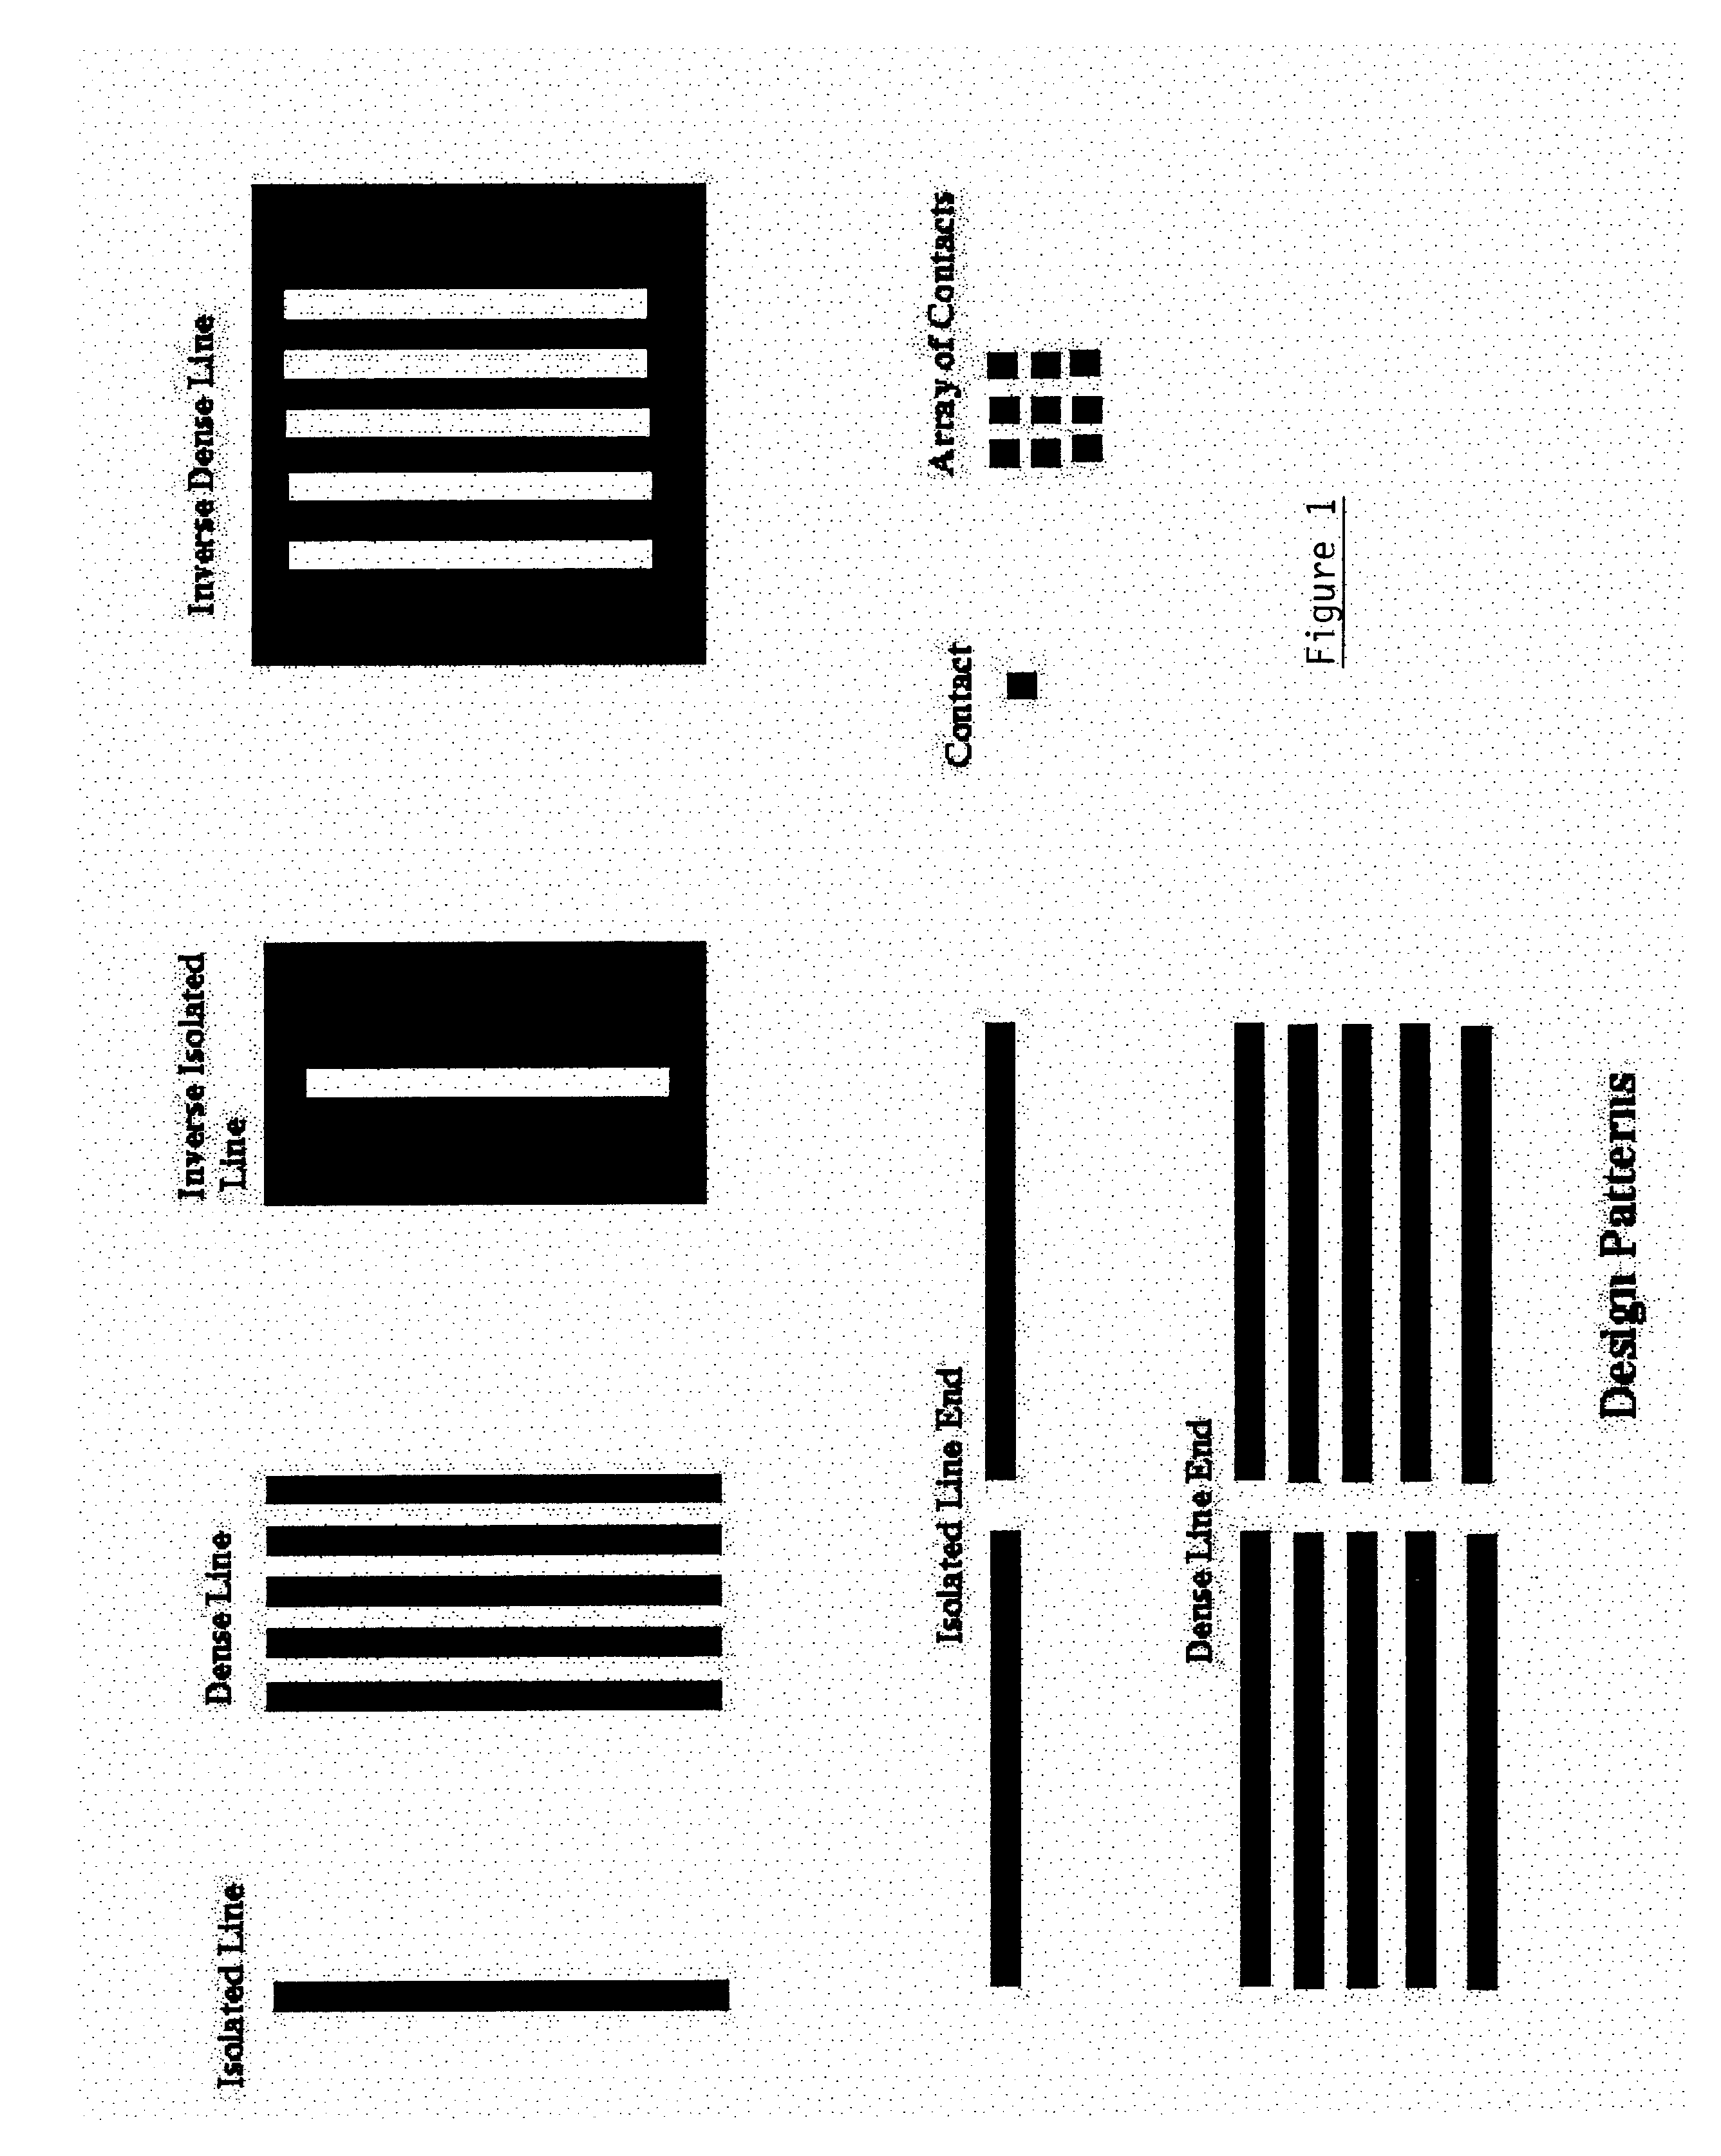 Method for correcting optical proximity effects in a lithographic process using the radius of curvature of shapes on a mask